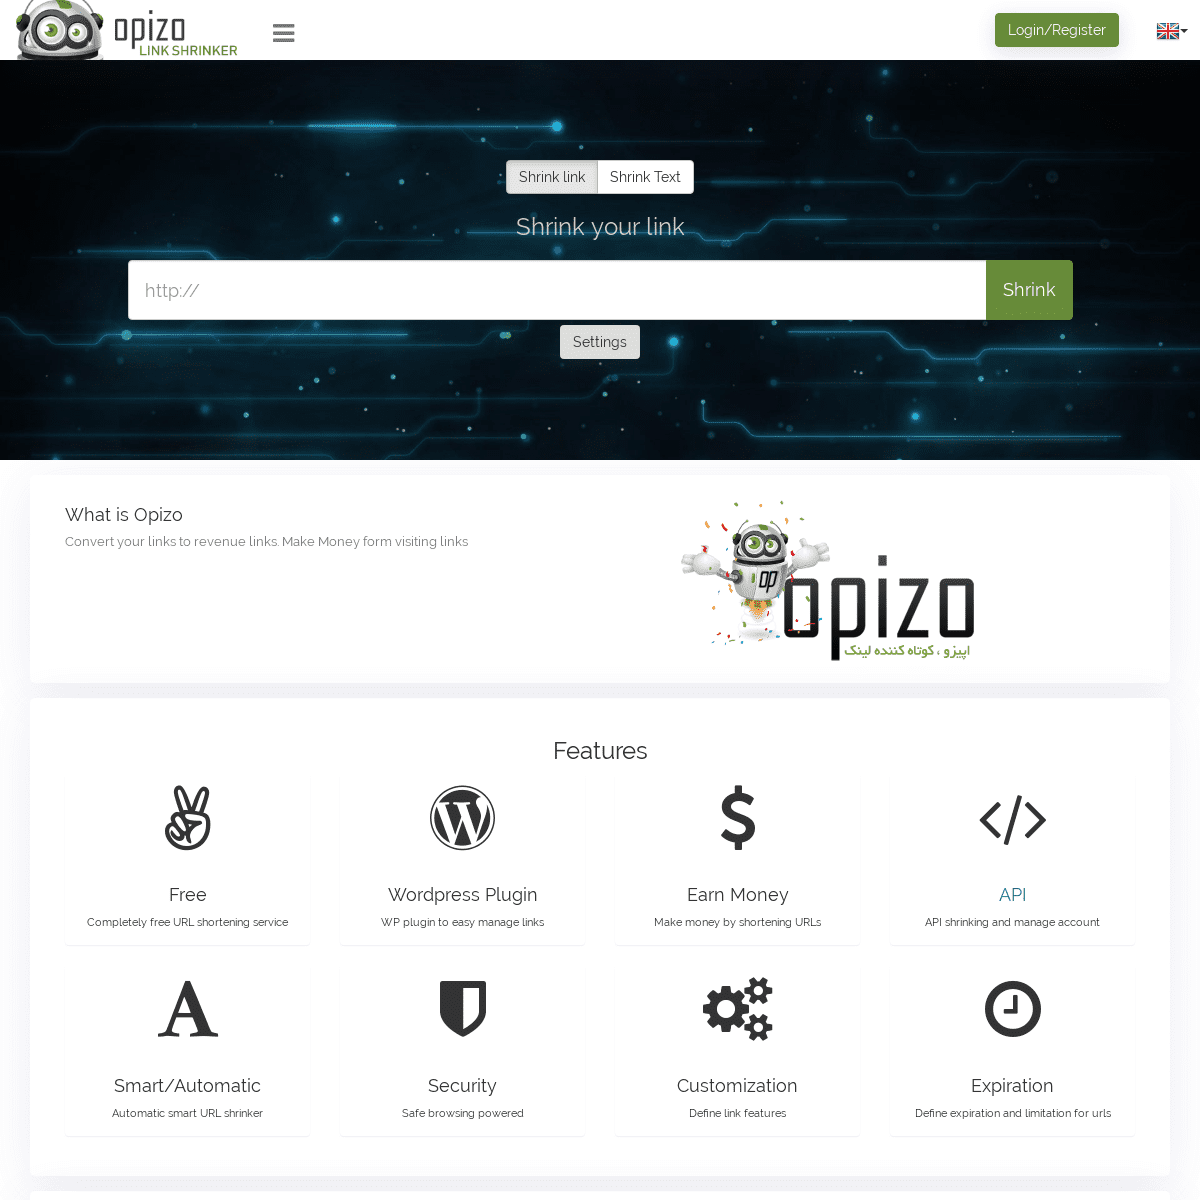 A complete backup of opizo.com